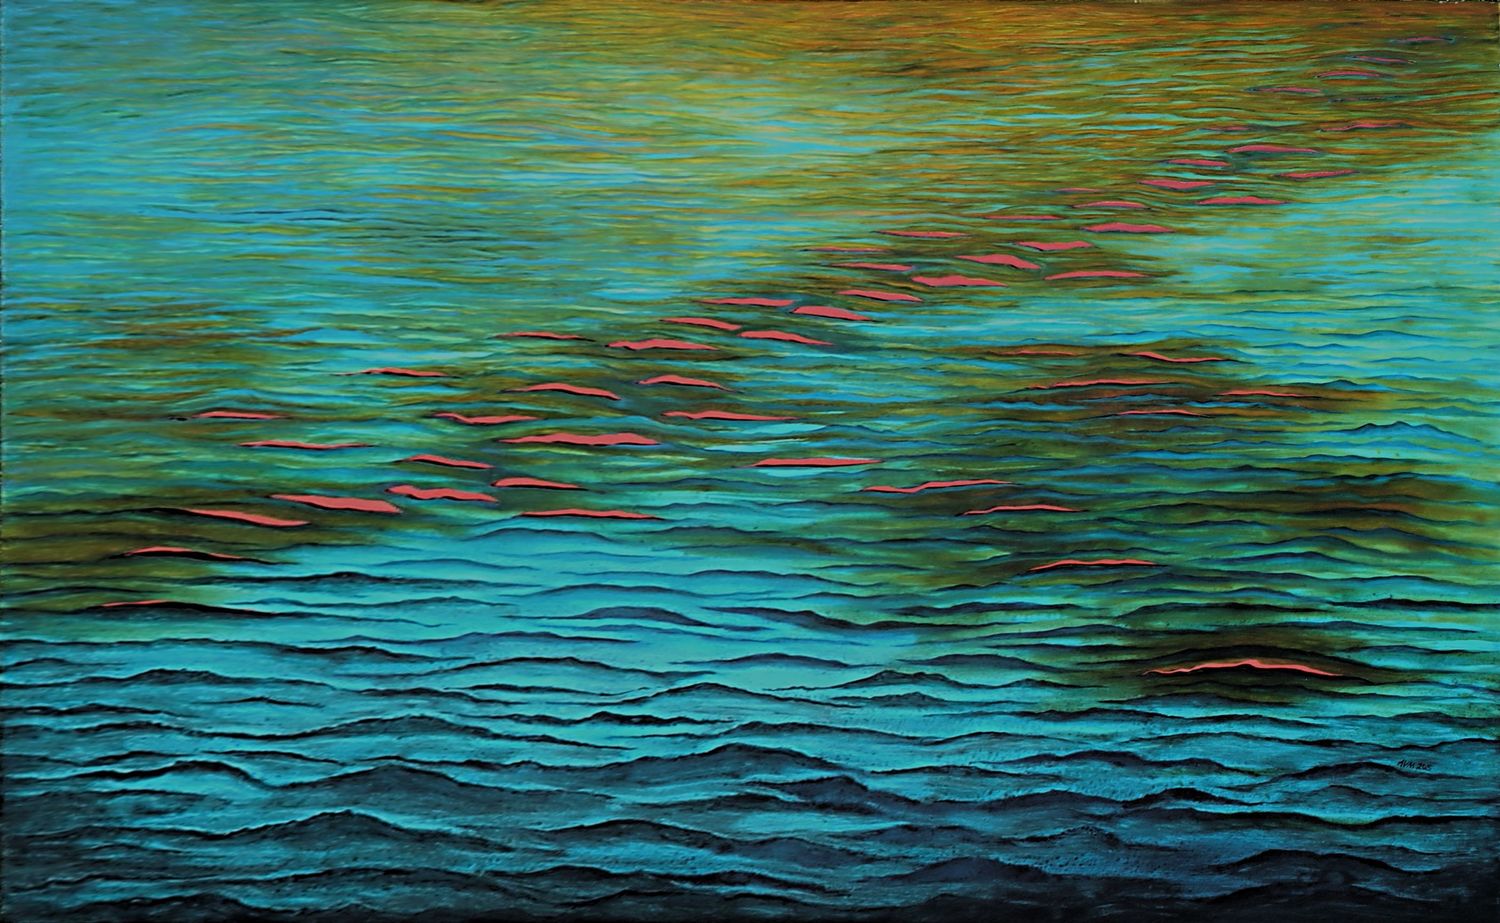 Sunset+Waves%2c+2015%2c+acrylic+on+cut+canvas+with+red+background%2c+48x72+in.jpg